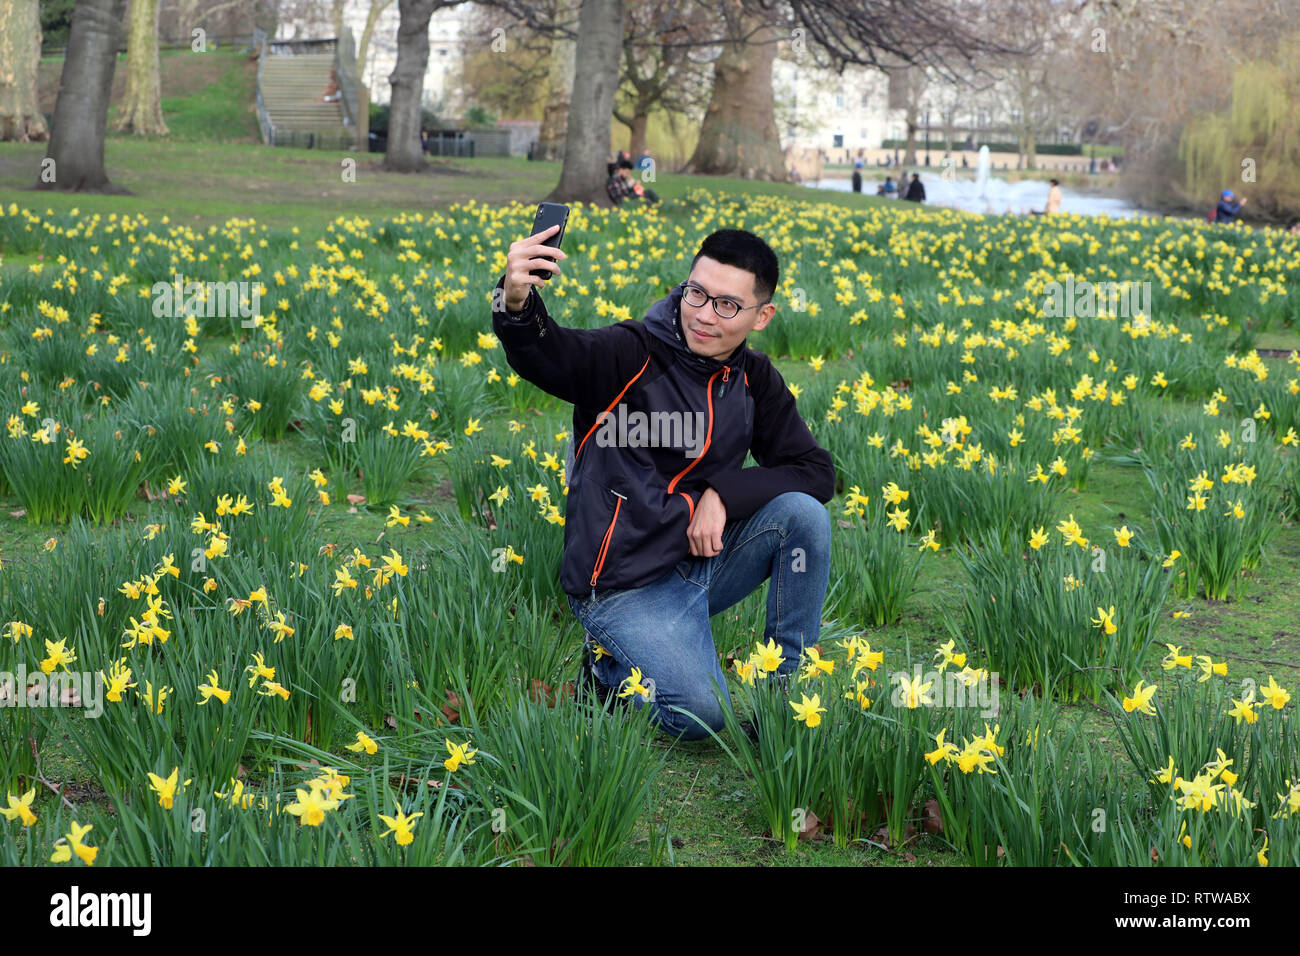 London, UK. 2nd March 2019. Cheng-Hua, visiting from Taiwan takes selfie photos with the daffodils in St James Park in London which are in bloom much earlier than normal due to the unseaonably warm weather recently Credit: Paul Brown/Alamy Live News Stock Photo